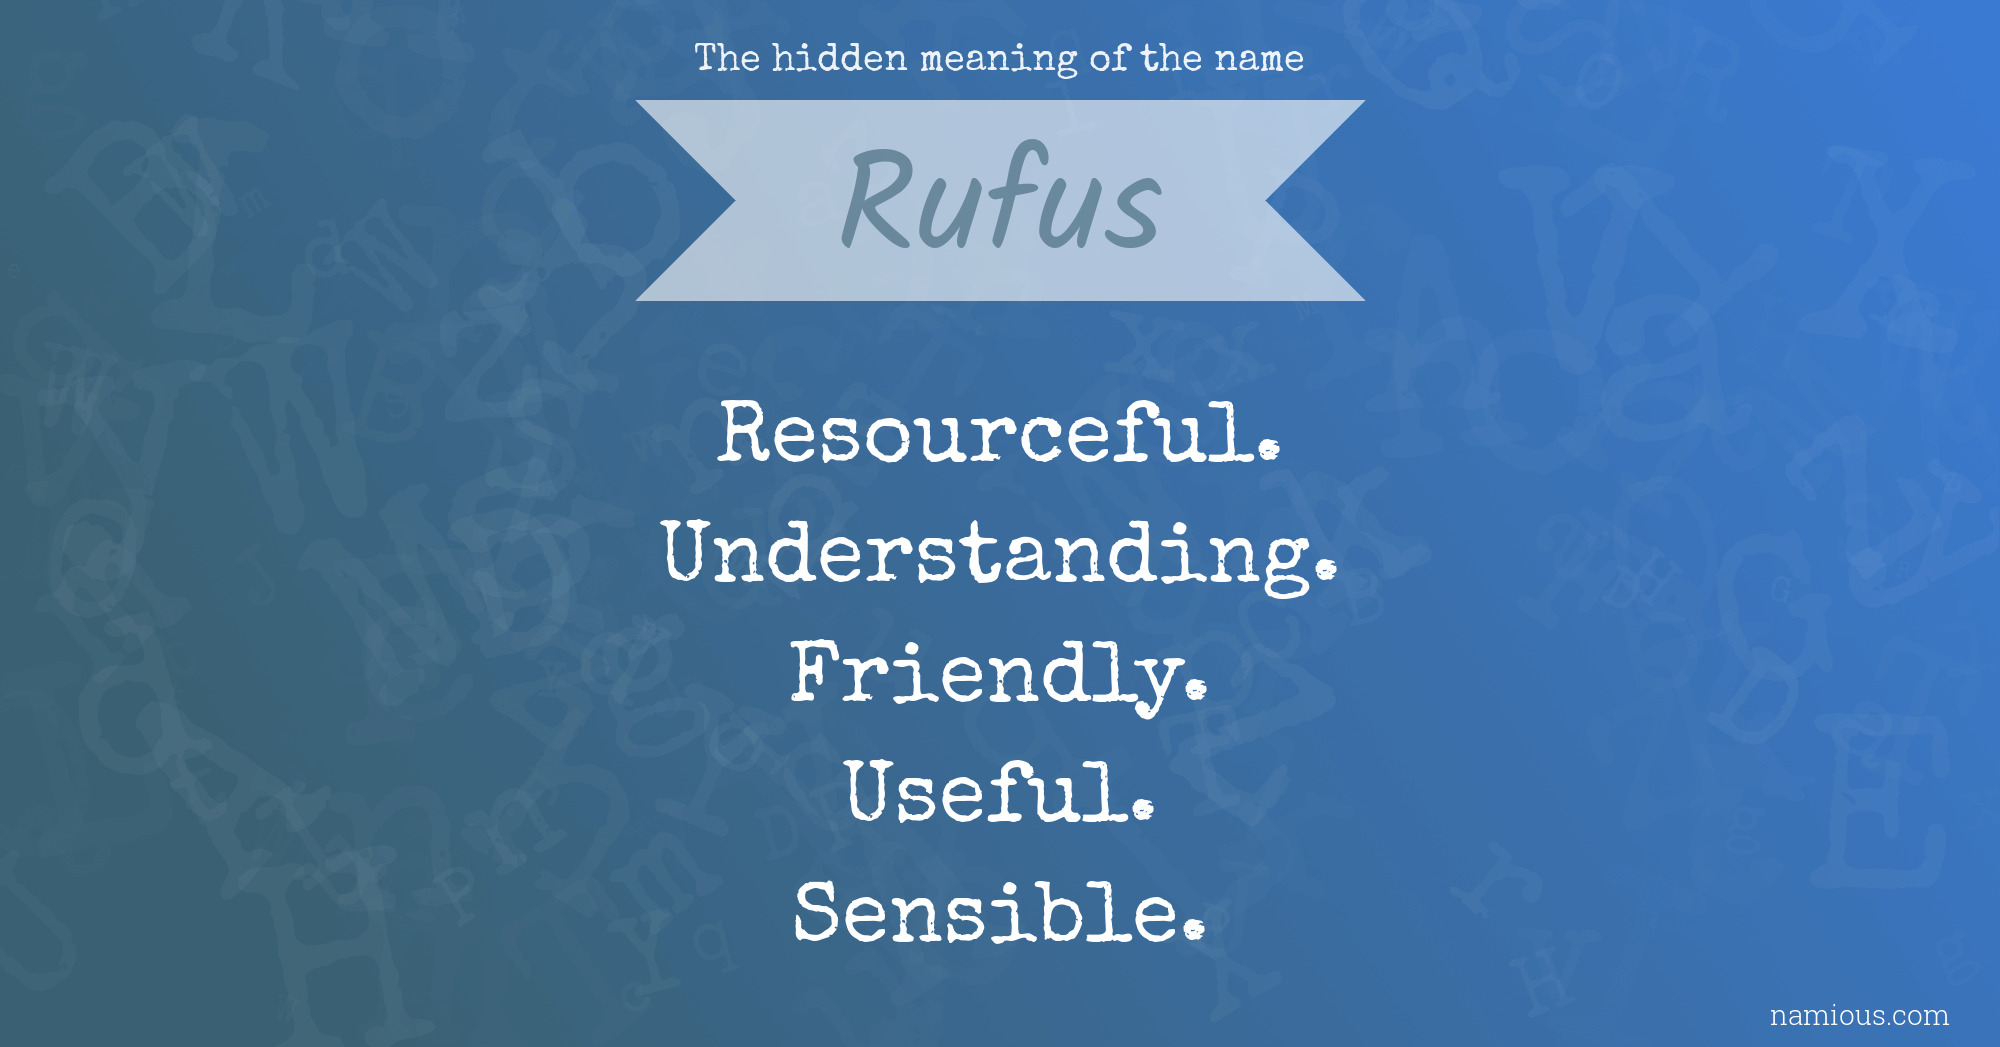 The hidden meaning of the name Rufus